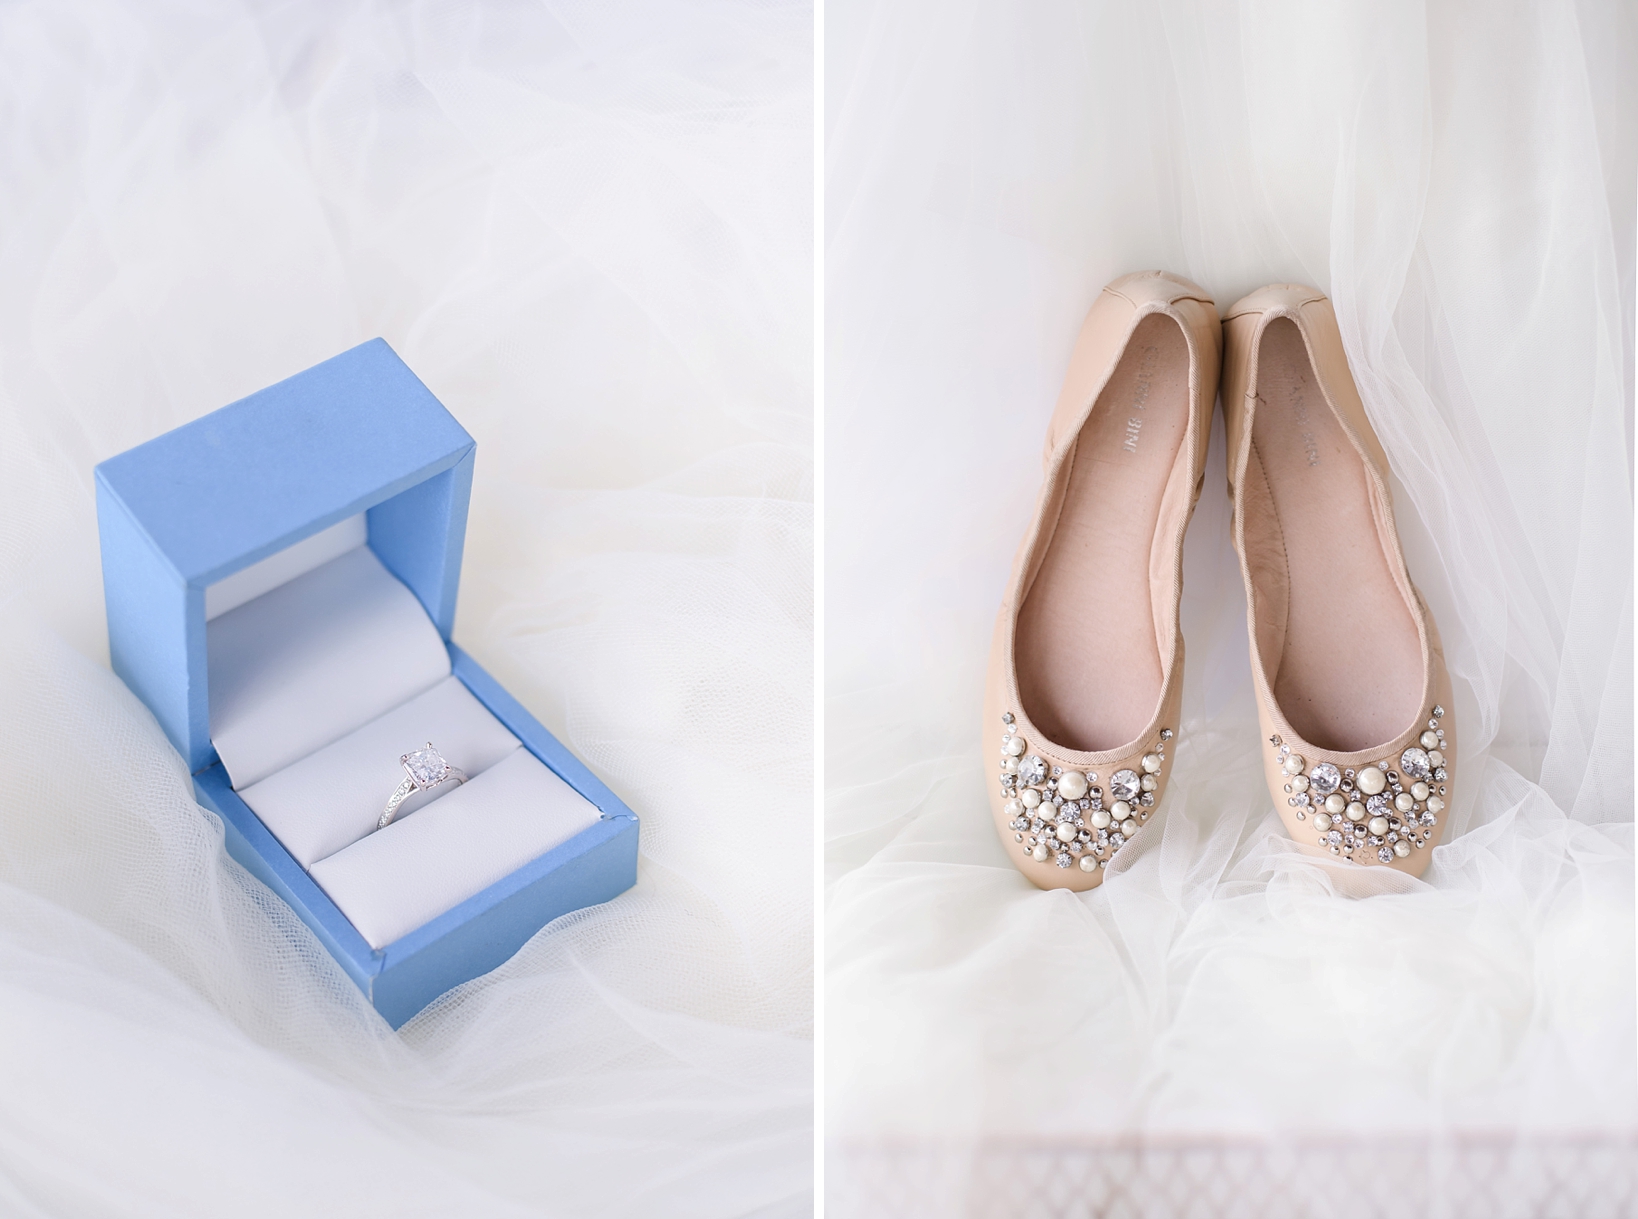 The wedding ring and the bride's flats against the wedding veil